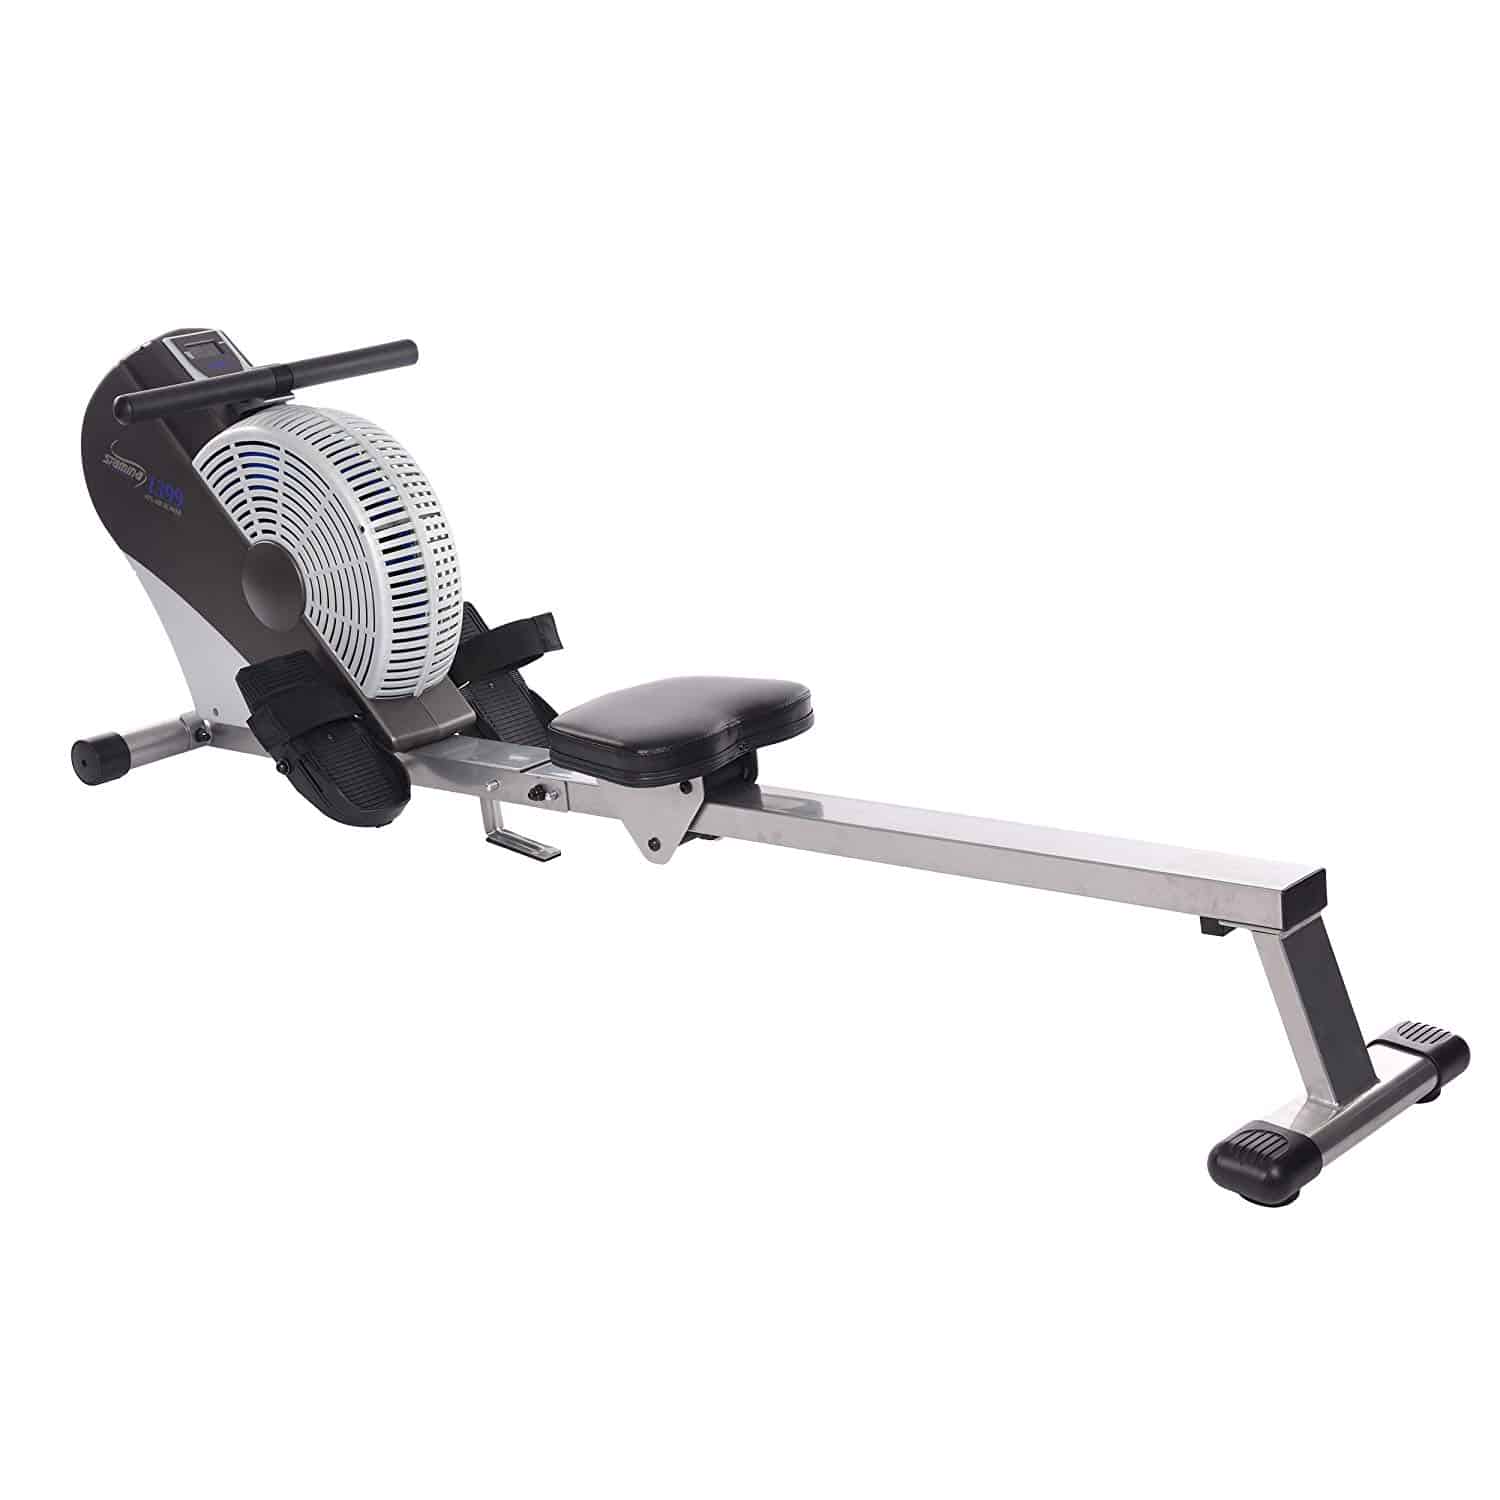 Stamina ATS Air Rower 1399 side view